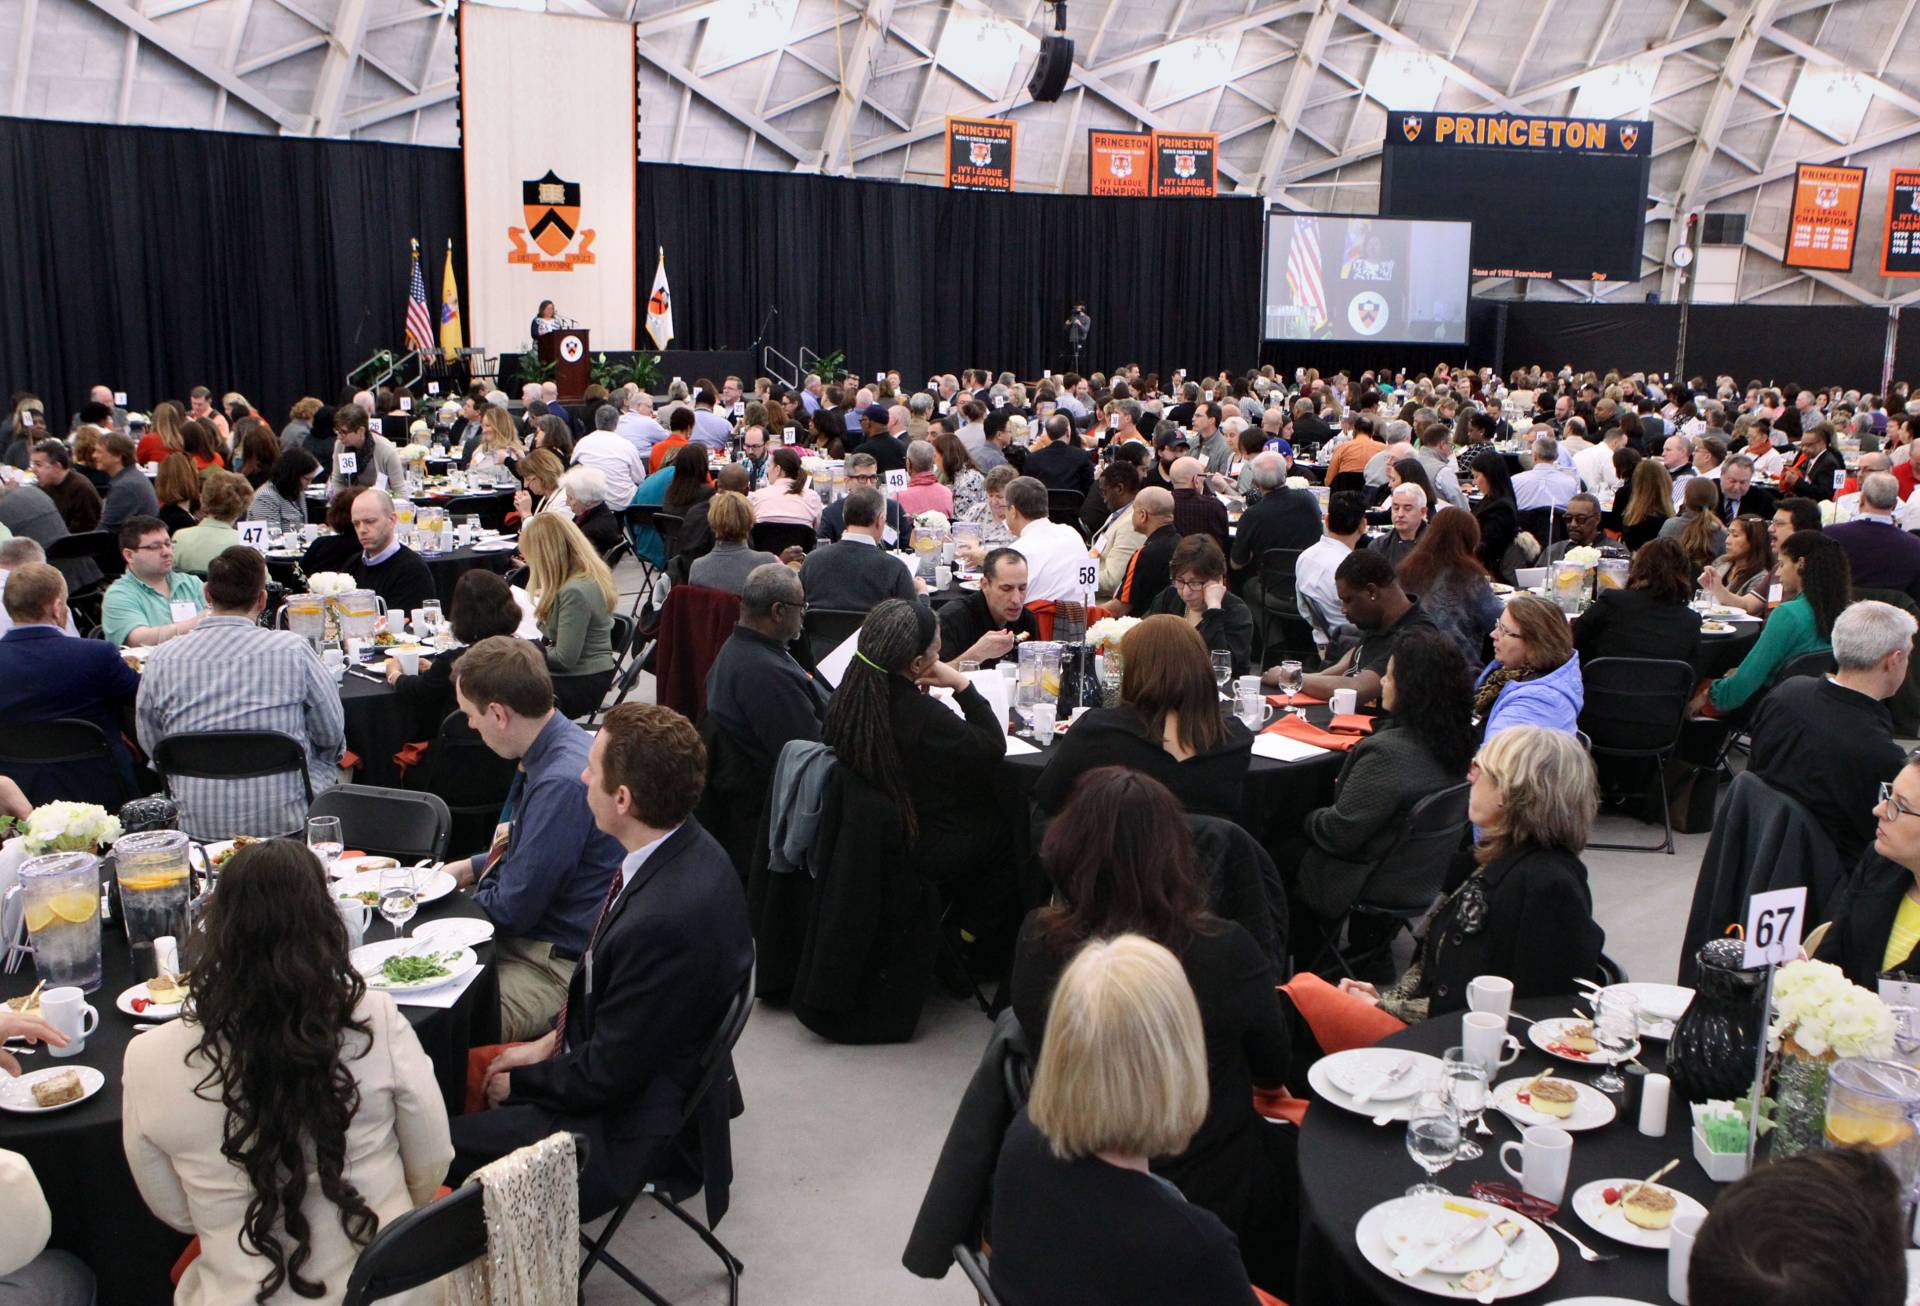 Staff recognition luncheon in Jadwin Gym